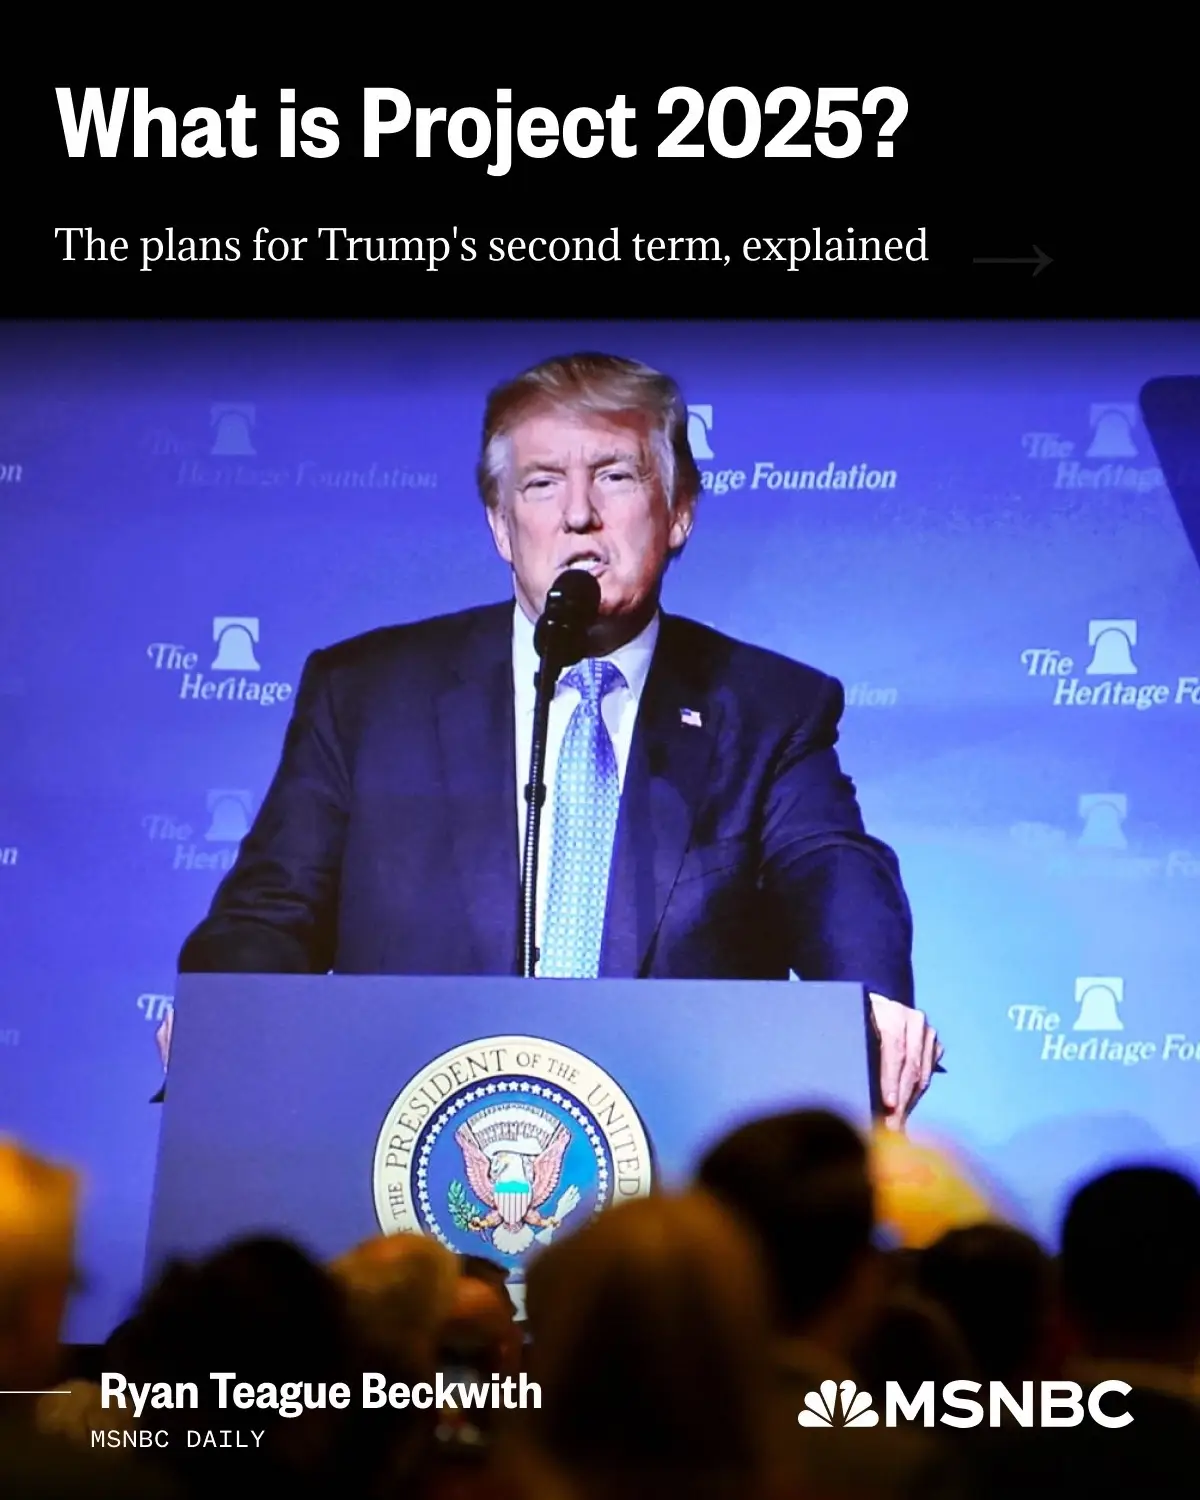 “A far-right blueprint for a second Donald Trump administration has become an increasing source of controversy, leading Trump to at least try to distance himself from it,” writes MSNBC Newsletter Editor Ryan Teague Beckwith. “But what would Project 2025 actually do?” “Clocking in at a staggering 920 pages, the proposal from the conservative Heritage Foundation and more than 100 like-minded groups outlines step-by-step plans to give the next president massive new powers and politicize federal agencies.” It also outlines a long wish list of conservative ideas he would pursue with those powers. Among other things, Project 2025 proposes: • Reducing legal immigration • Reversing the FDA’s approval of abortion pills • Developing new nuclear weapons • Stripping NPR and PBS of federal funding • Abolishing the Department of Education and the National Oceanic and Atmospheric Administration “There are signs that voters are responding. Searches for 